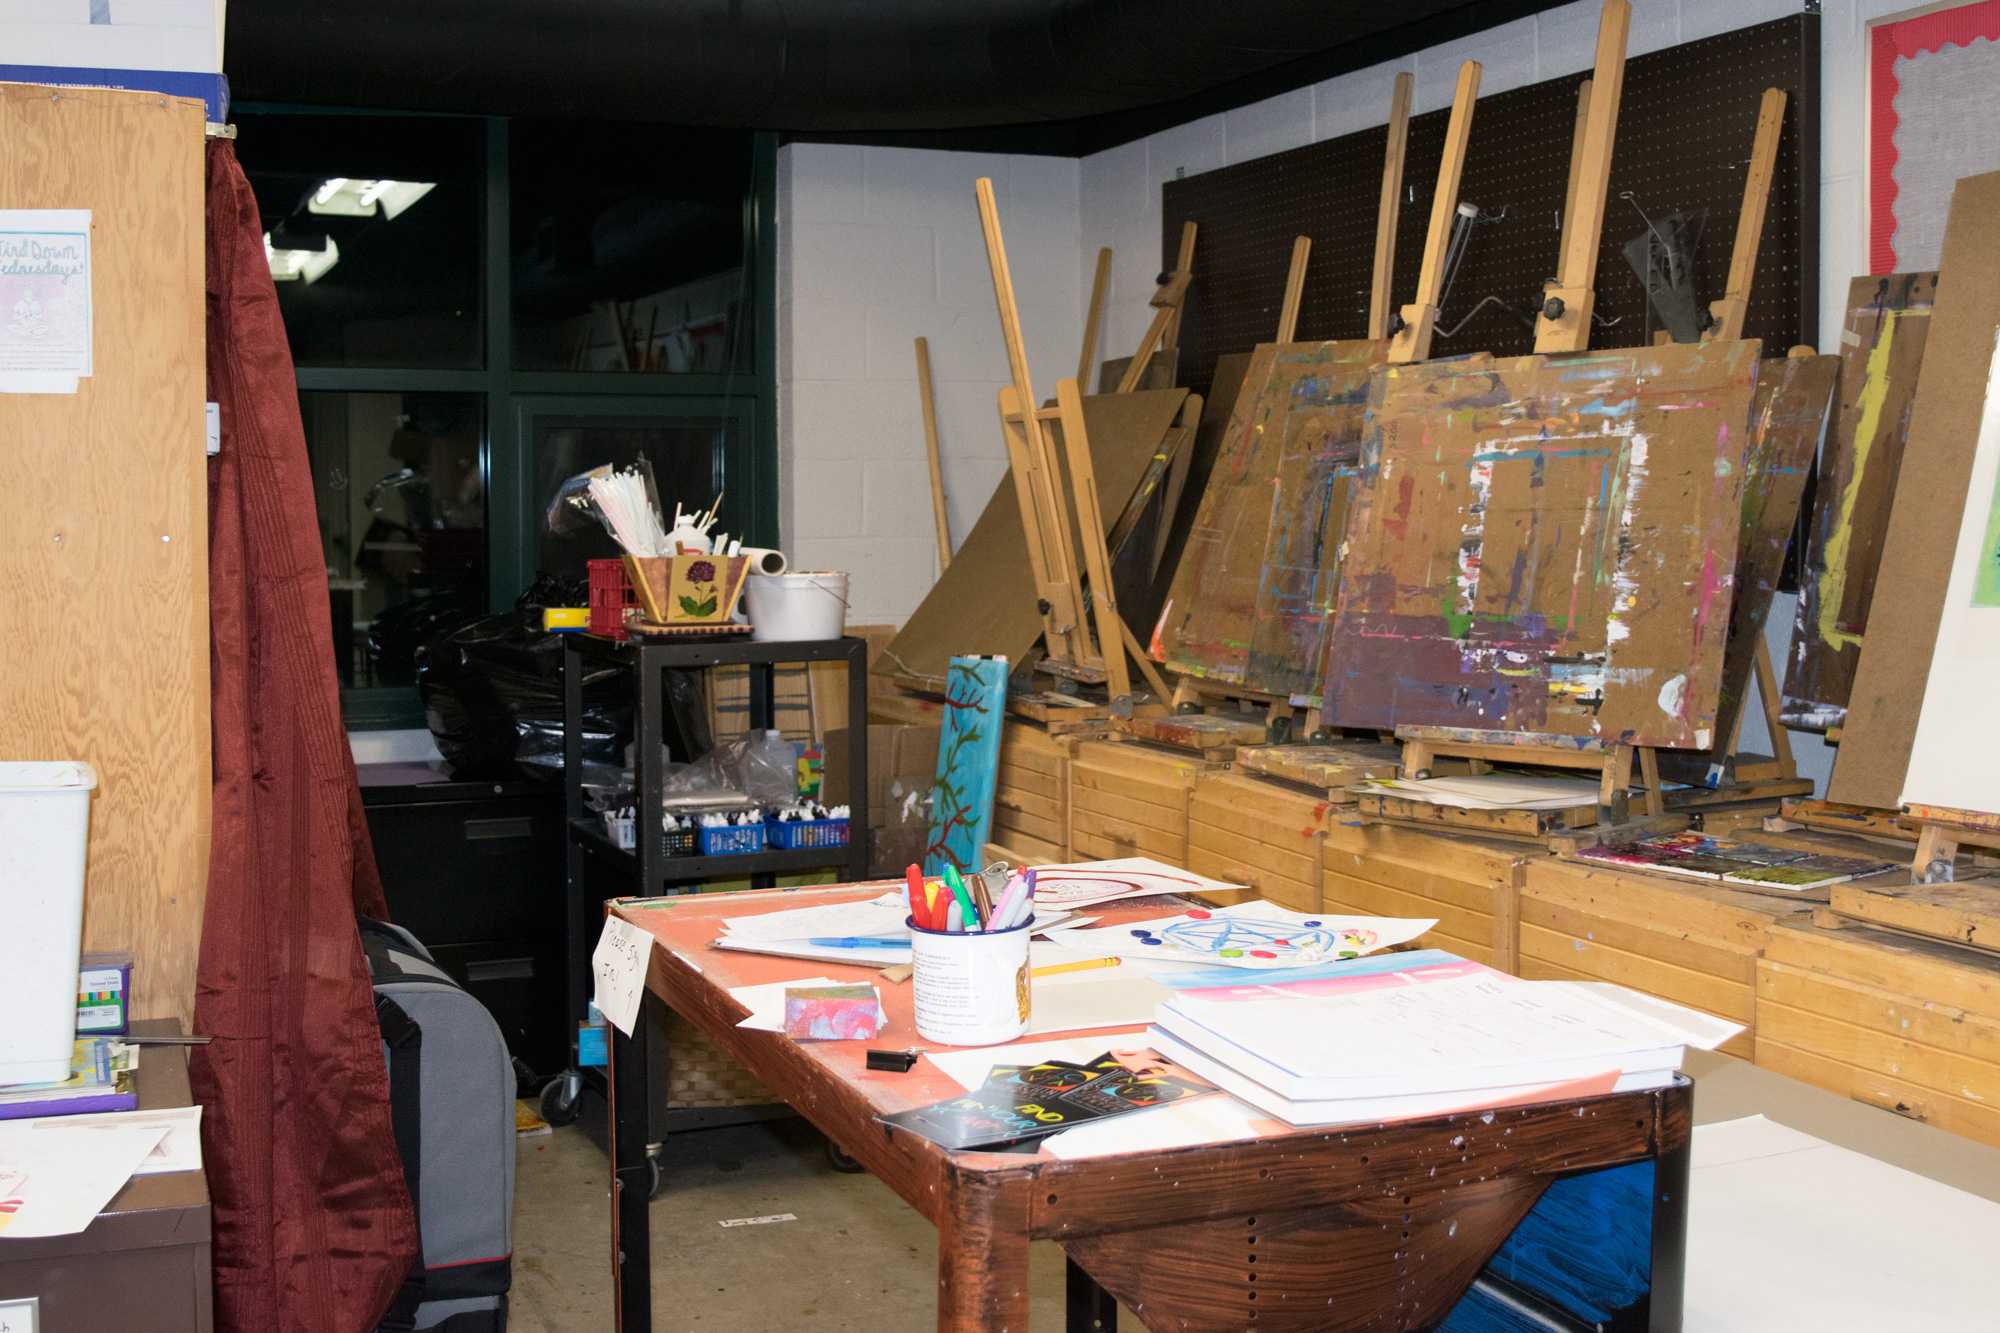 Canvases+and+easels+await+use+at+the+Turchins+art+studio.